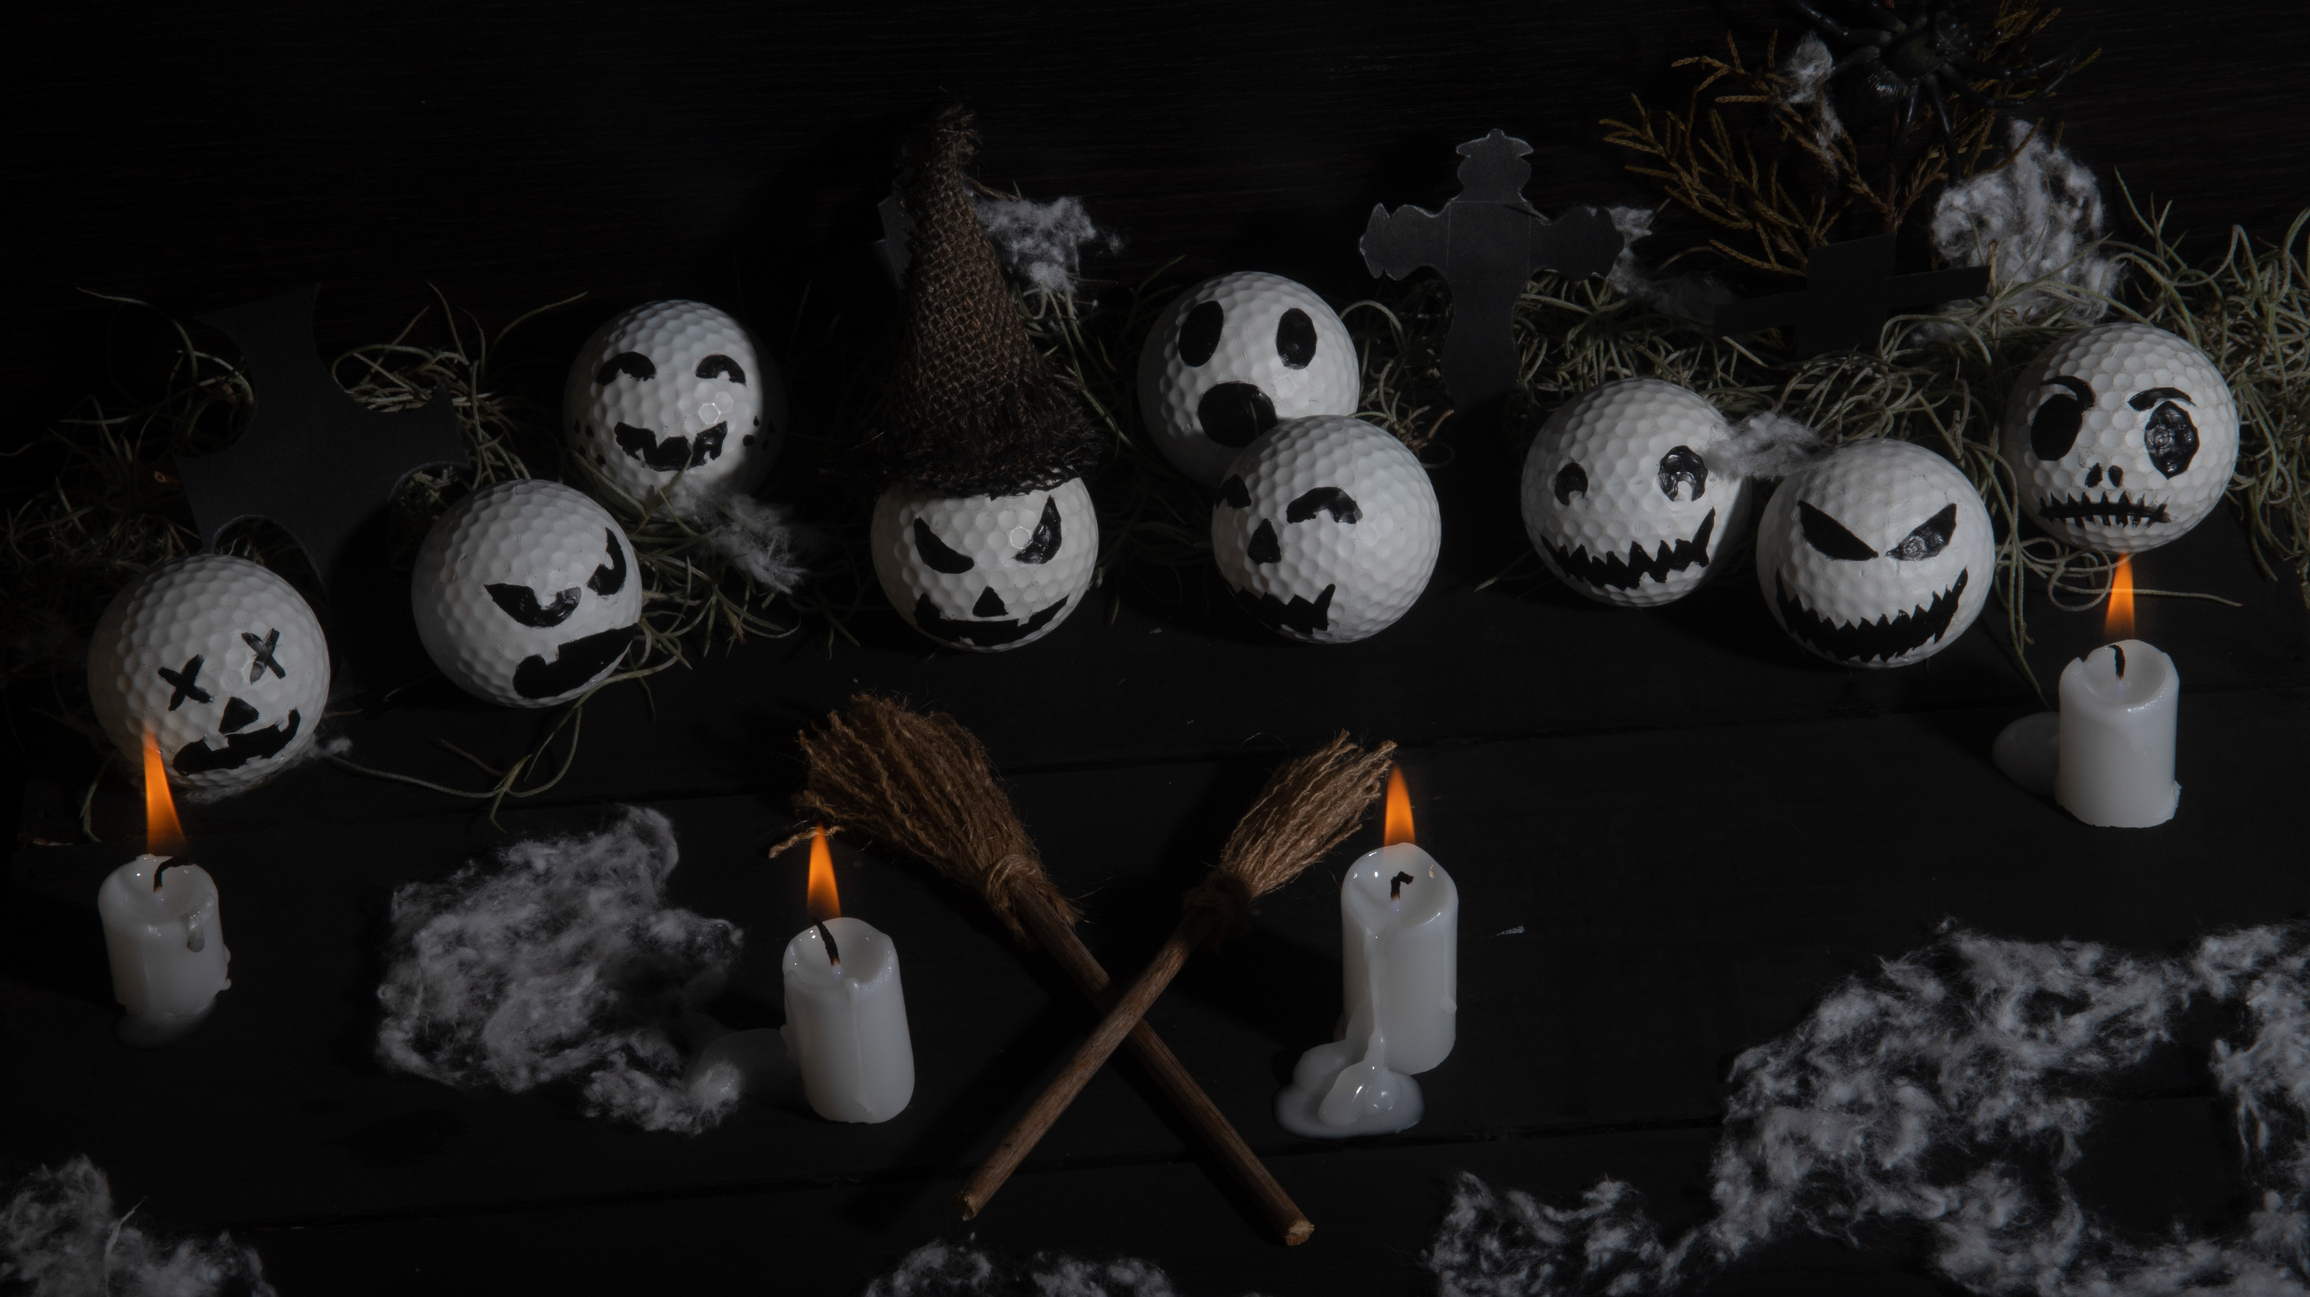 Golf balls with spooky Halloween decorations